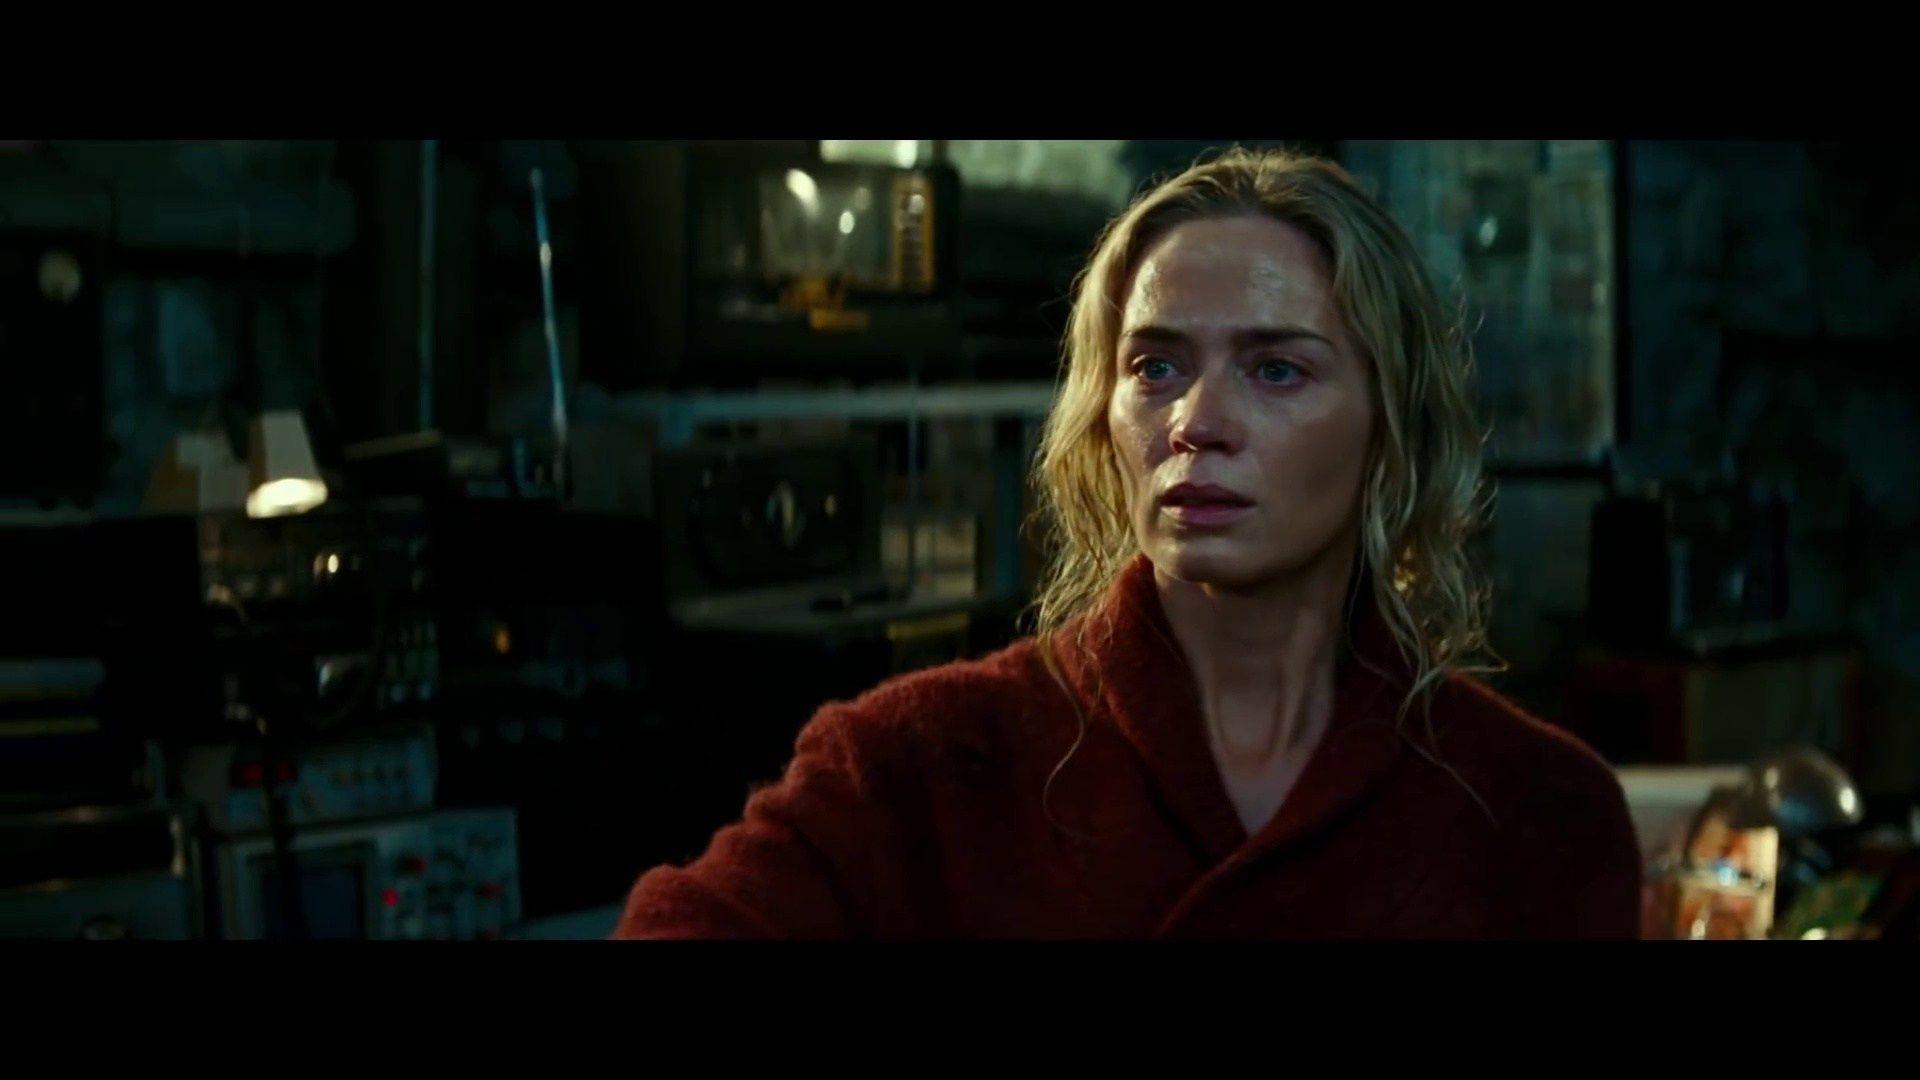 A Quiet Place / Movie Trailers �